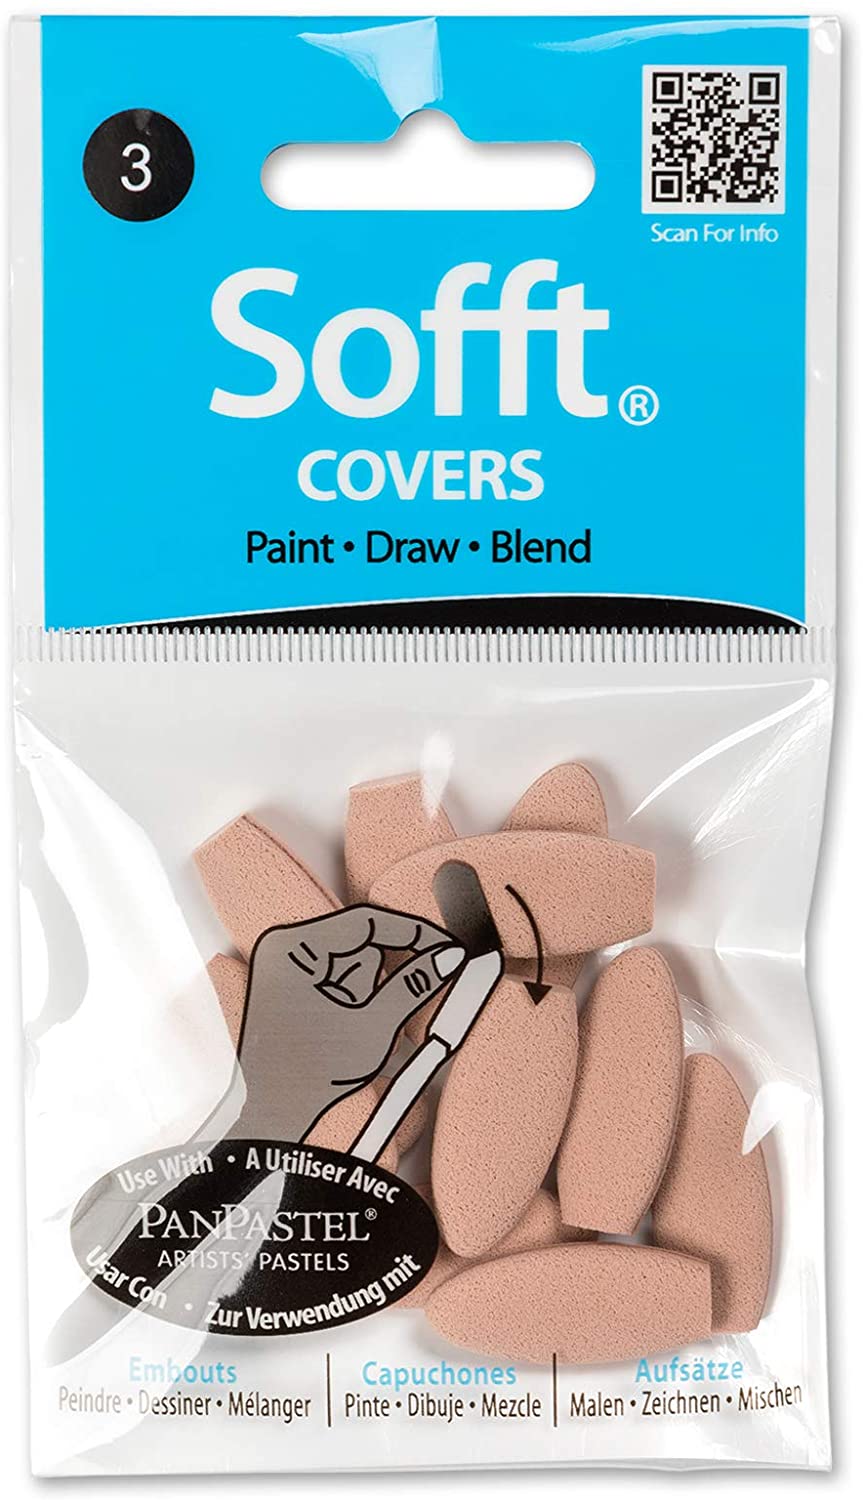 Sofft Art Sponge 10 Oval No. 3 Covers (62003)